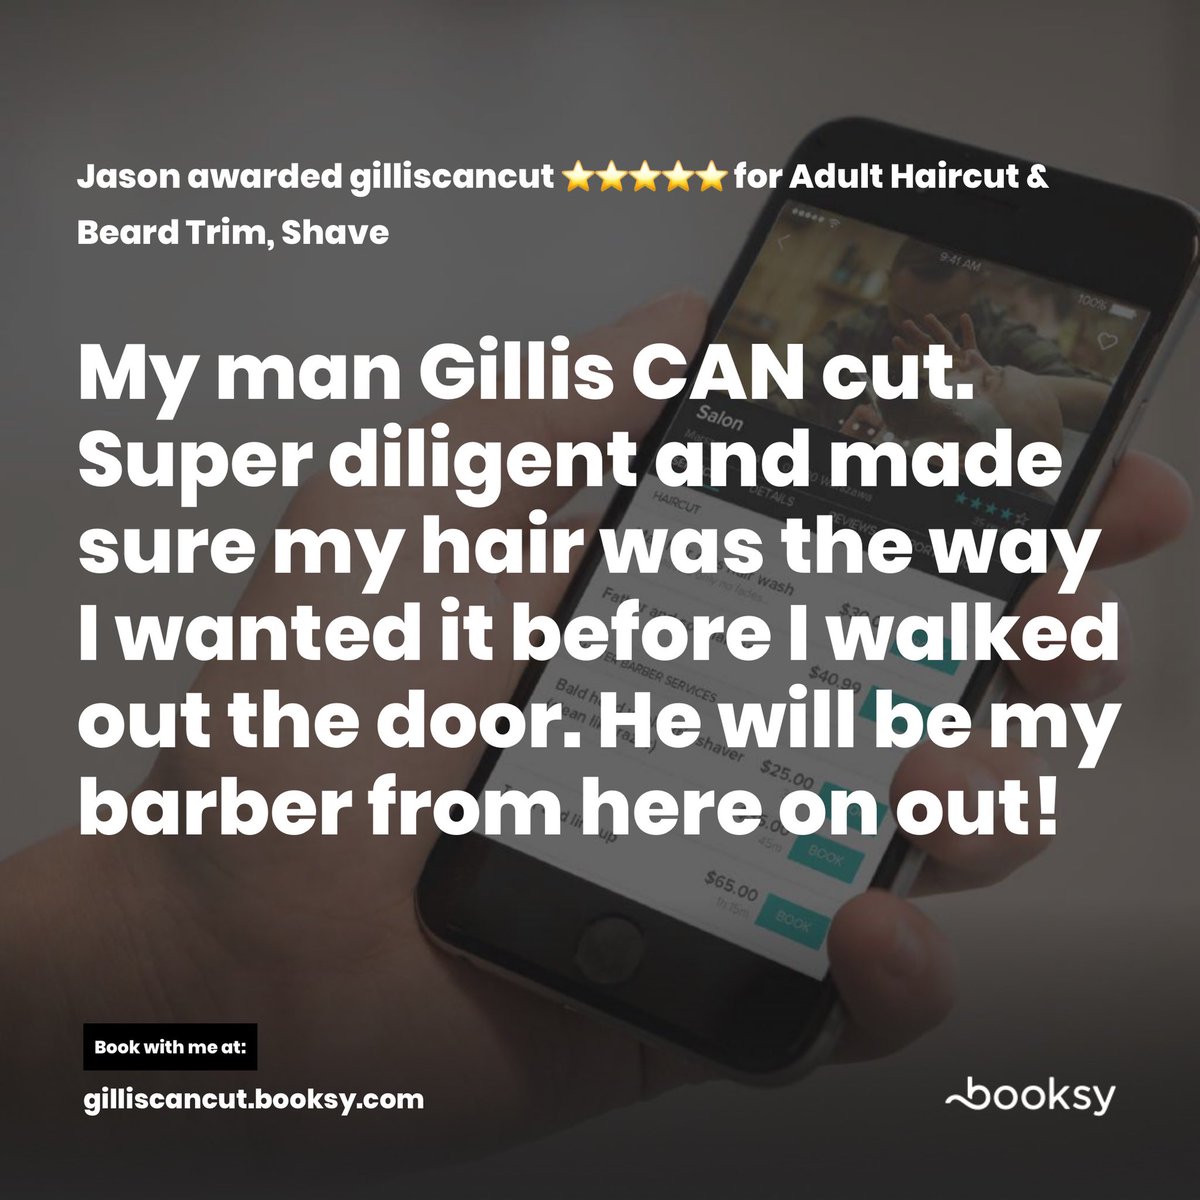 Good Morning ! 
.
Will be in Nacogdoches on the 24th‼️
.
Follow me on all social media 👇🏽
@gilliscancut
.
#gilliscancut #Beaumonttx #barber #bmt #barbershop #BooksyBiz #bmtbarber #booksy #reviews #haircut #Beaumonttexas #beaumont #review #goodreviews #barberlife #fivestar